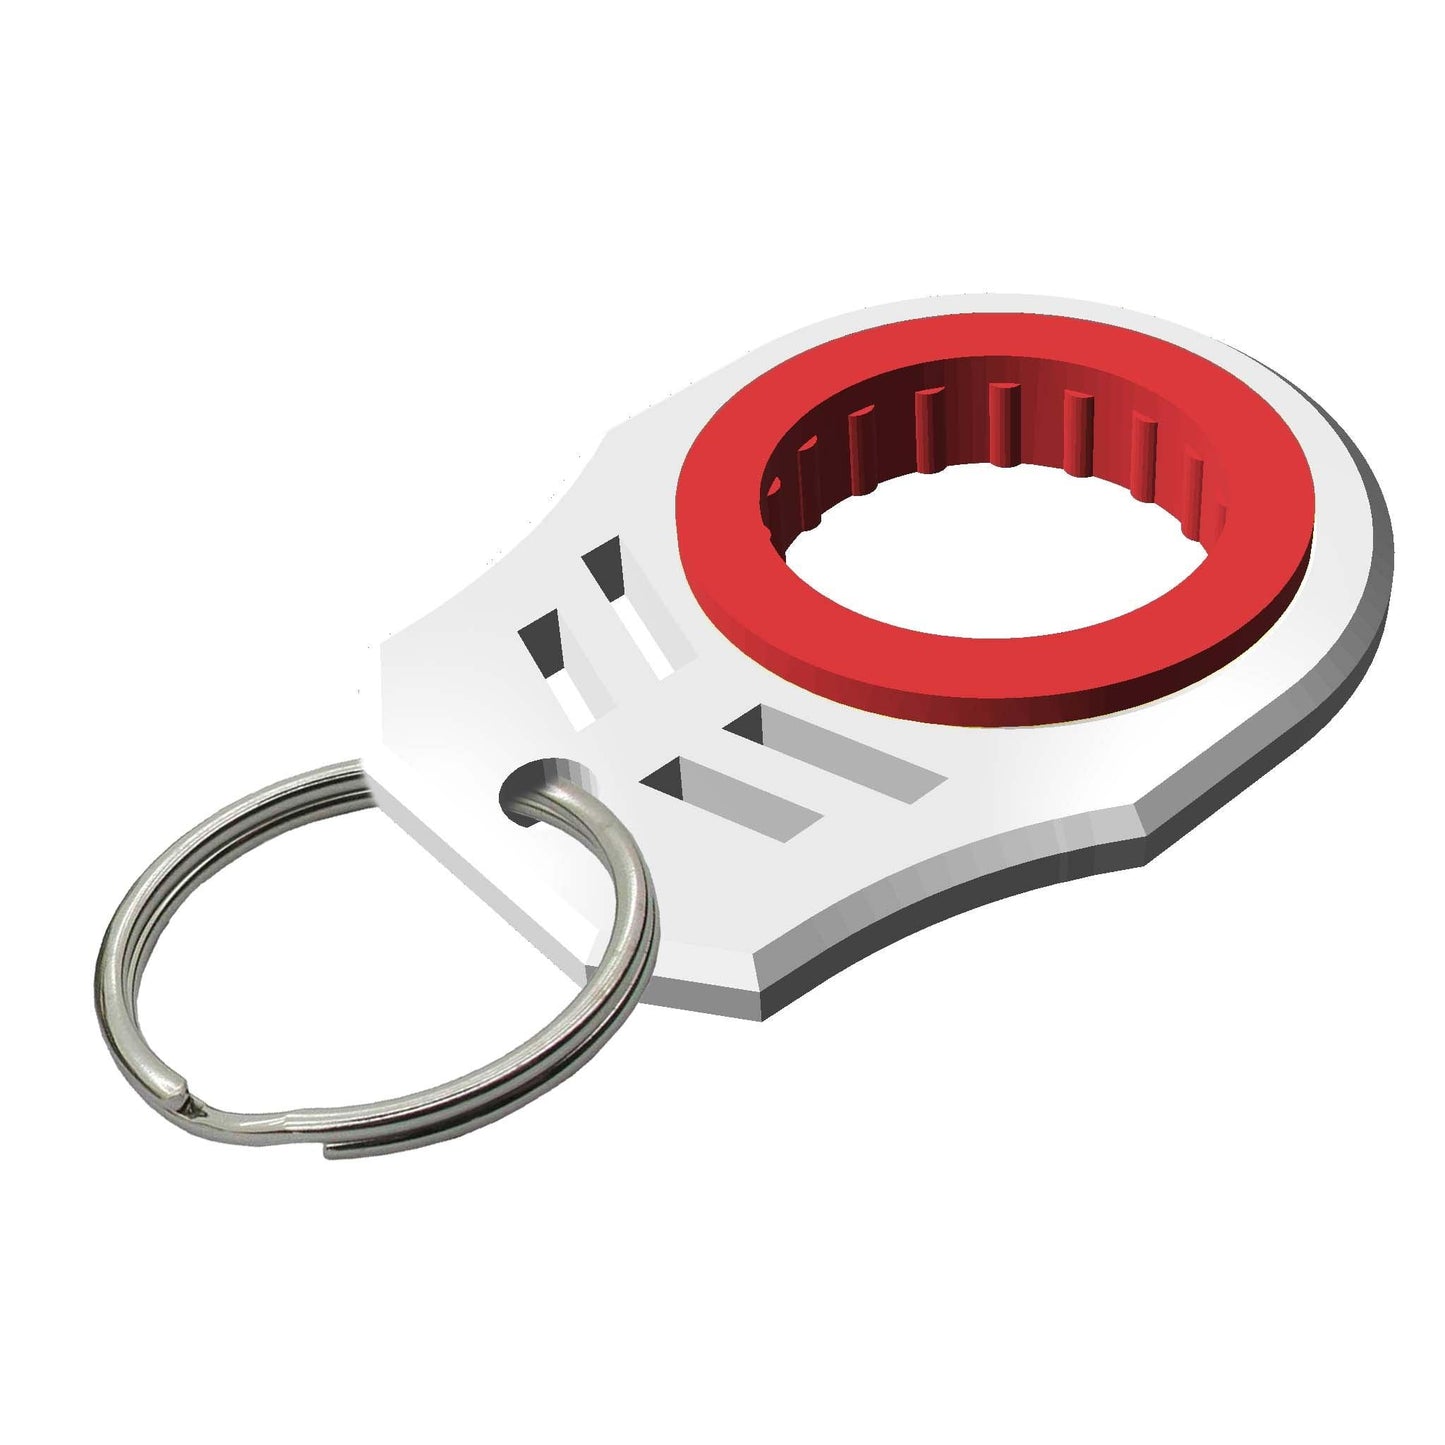 Key Spinner with Key Ring Attachment